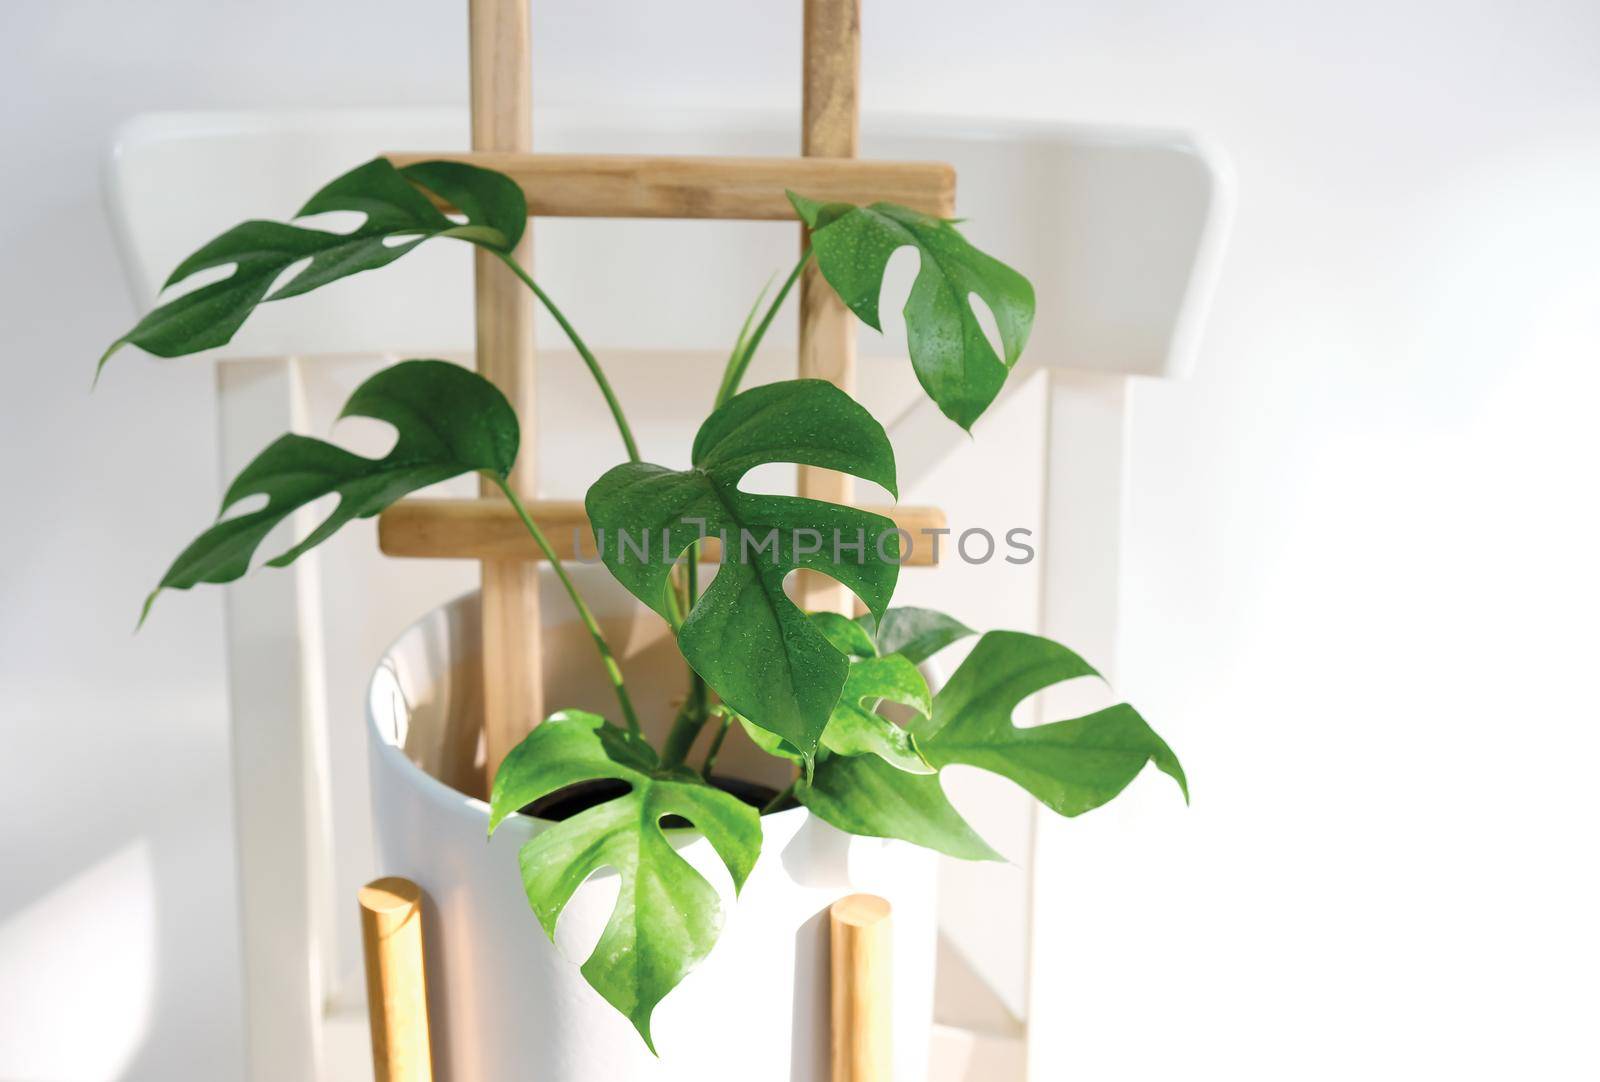 Rhaphidophora tetrasperma or Mini monstera Ginny philodendron in white ceramic pot on the chair